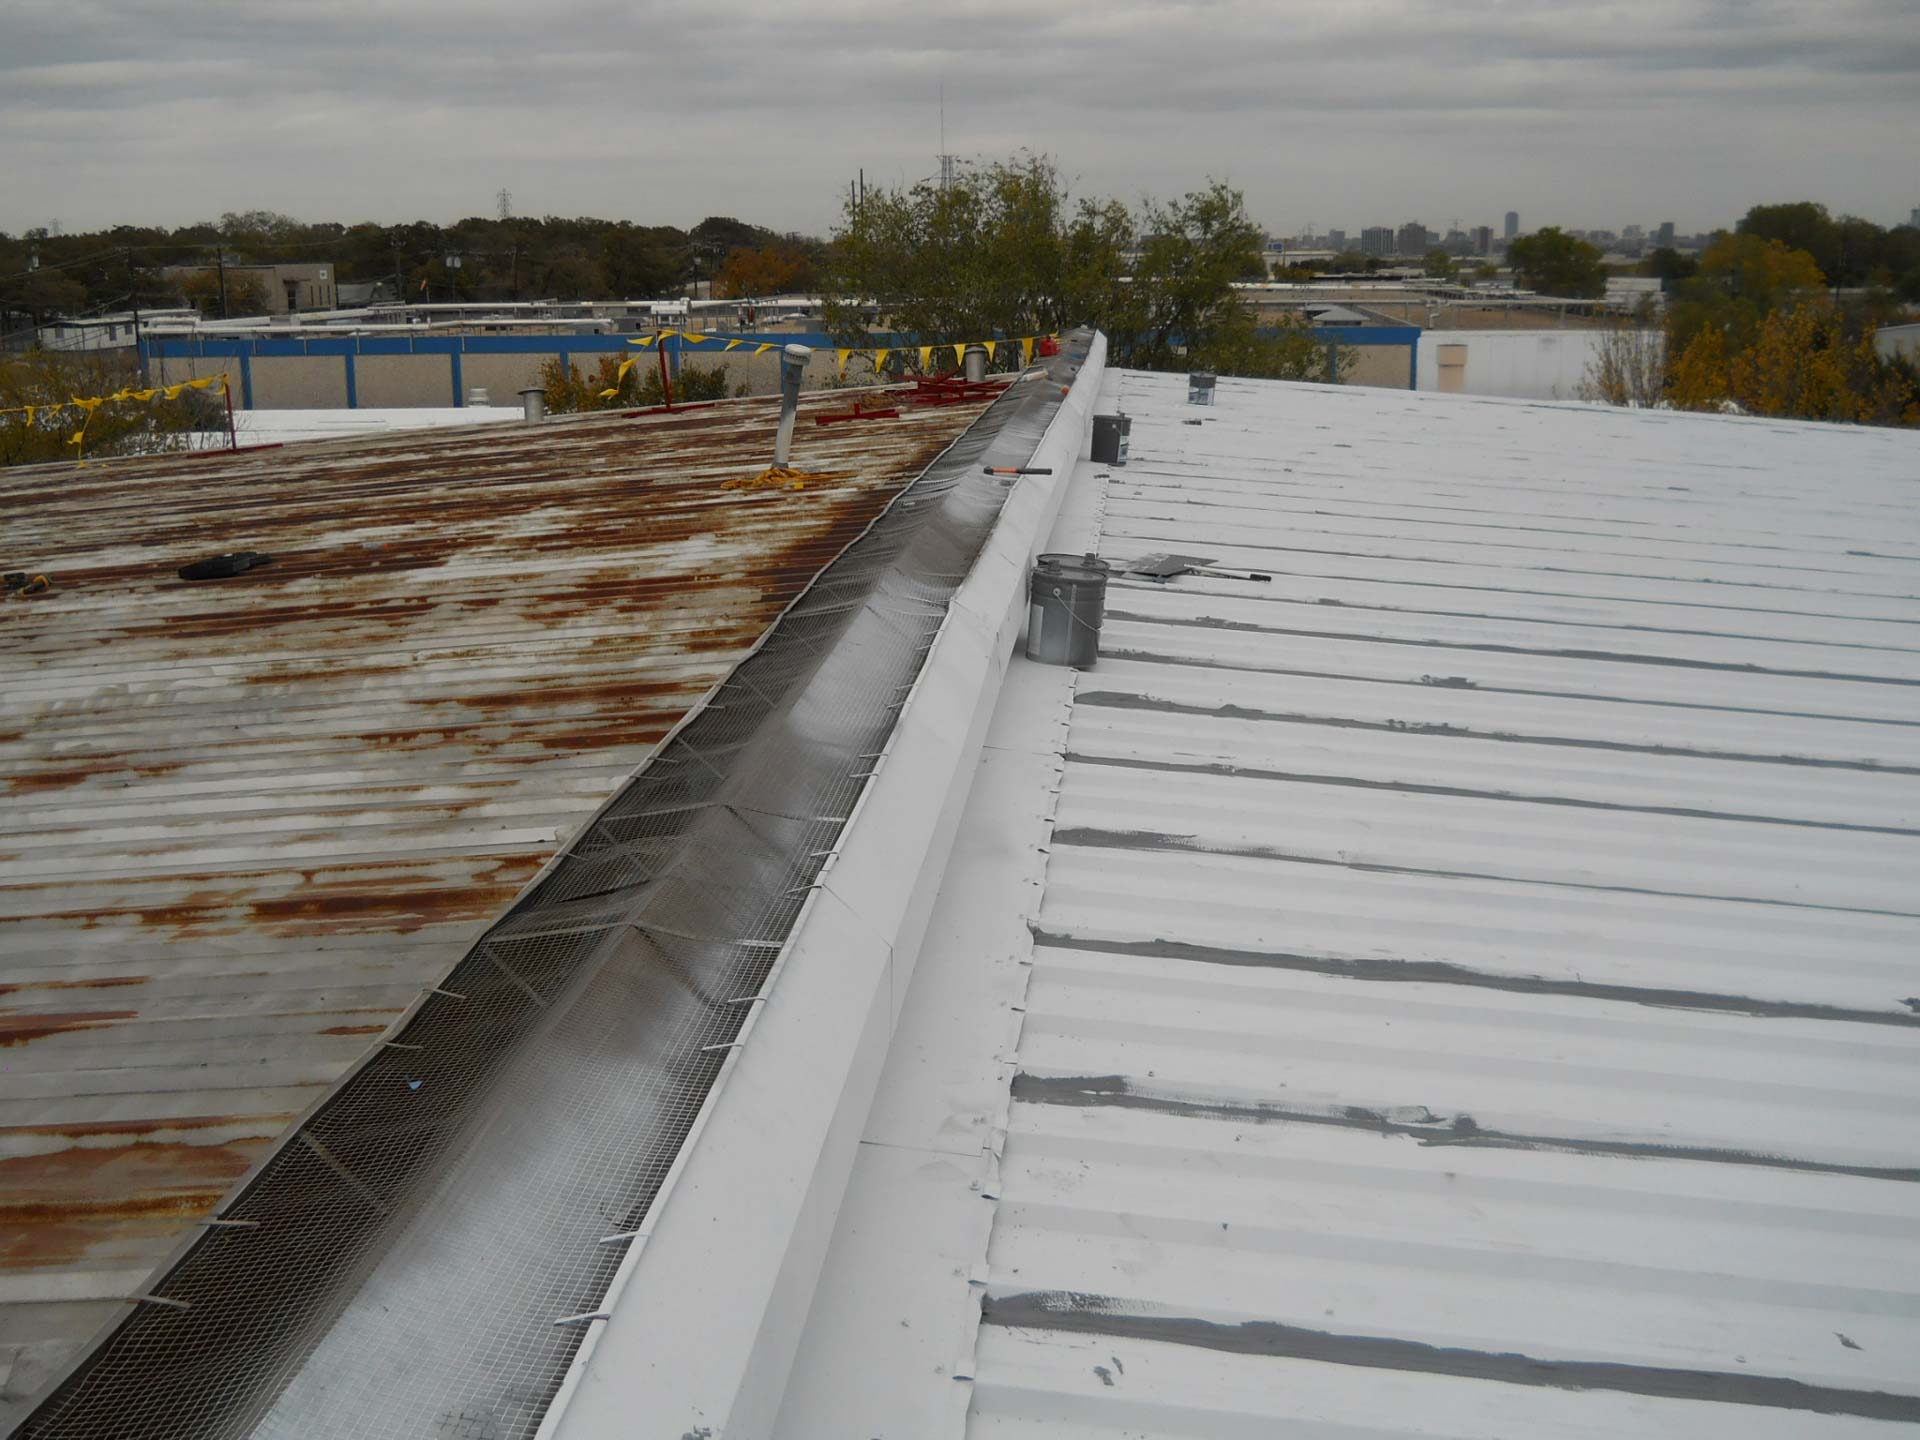 Roof Coating - Nelson Roofing Company